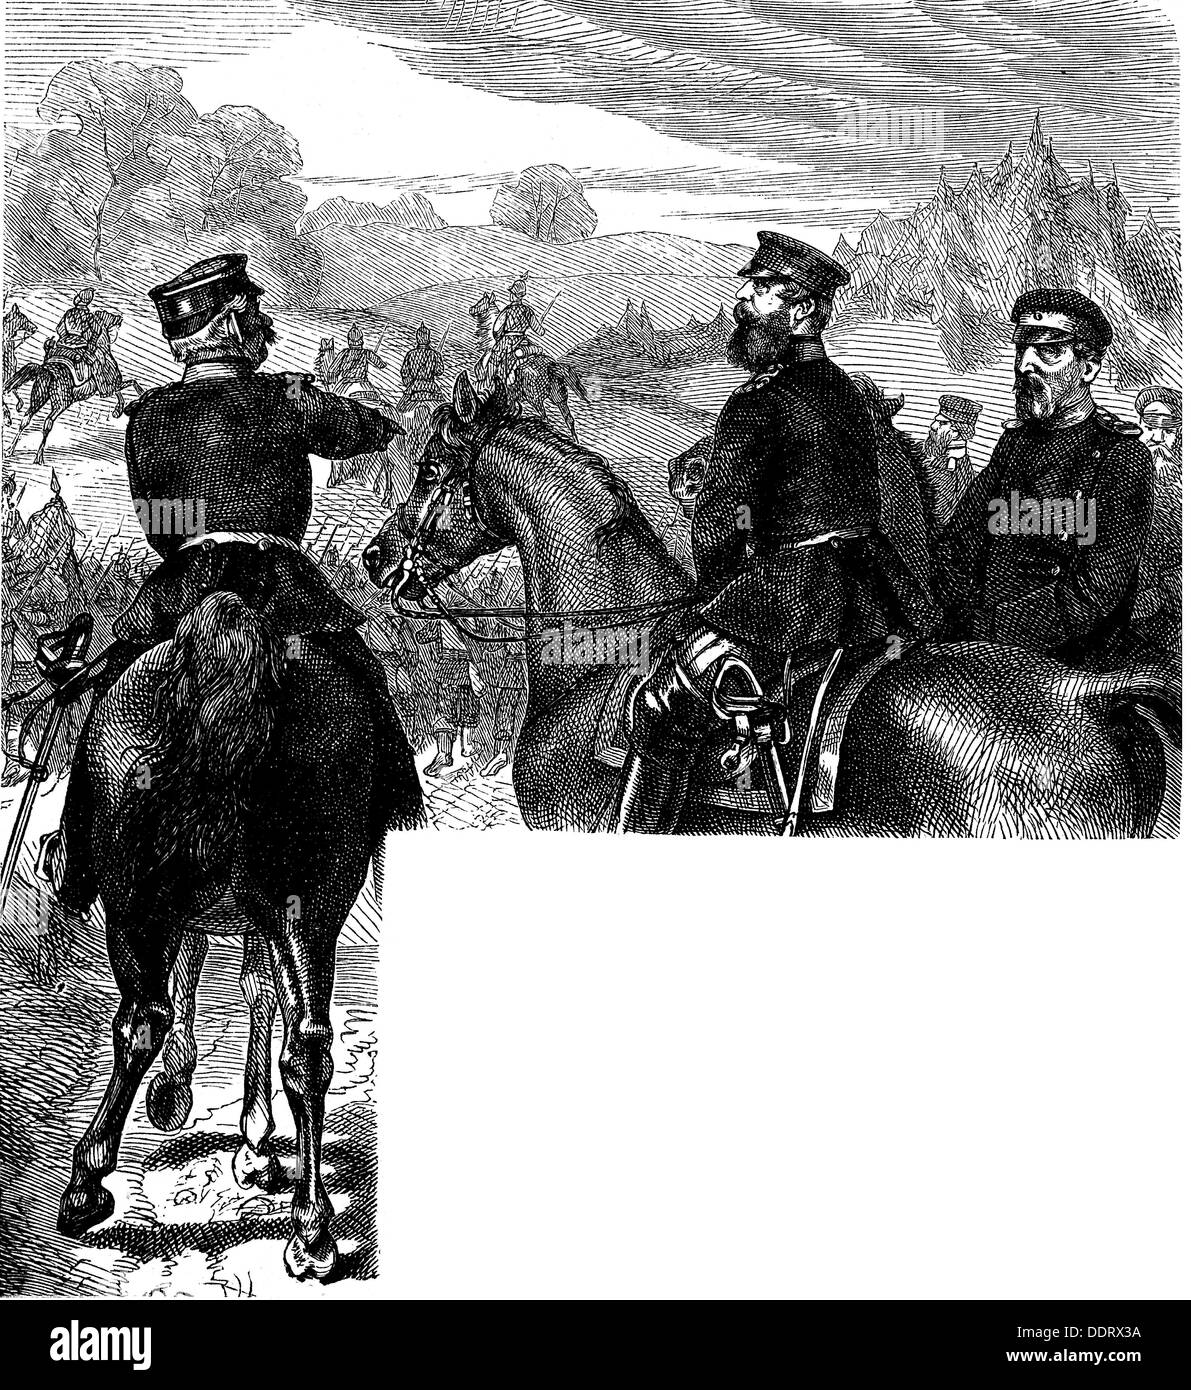 Frederick III, 18.10.1831 - 15.6.1888, German Emperor 9.3. - 15.6.1888, commanding general of the Prussian 2nd Army 1866, in the Battle of Koeniggraetz, 3.7.1866, contemporary wood engraving, Stock Photo